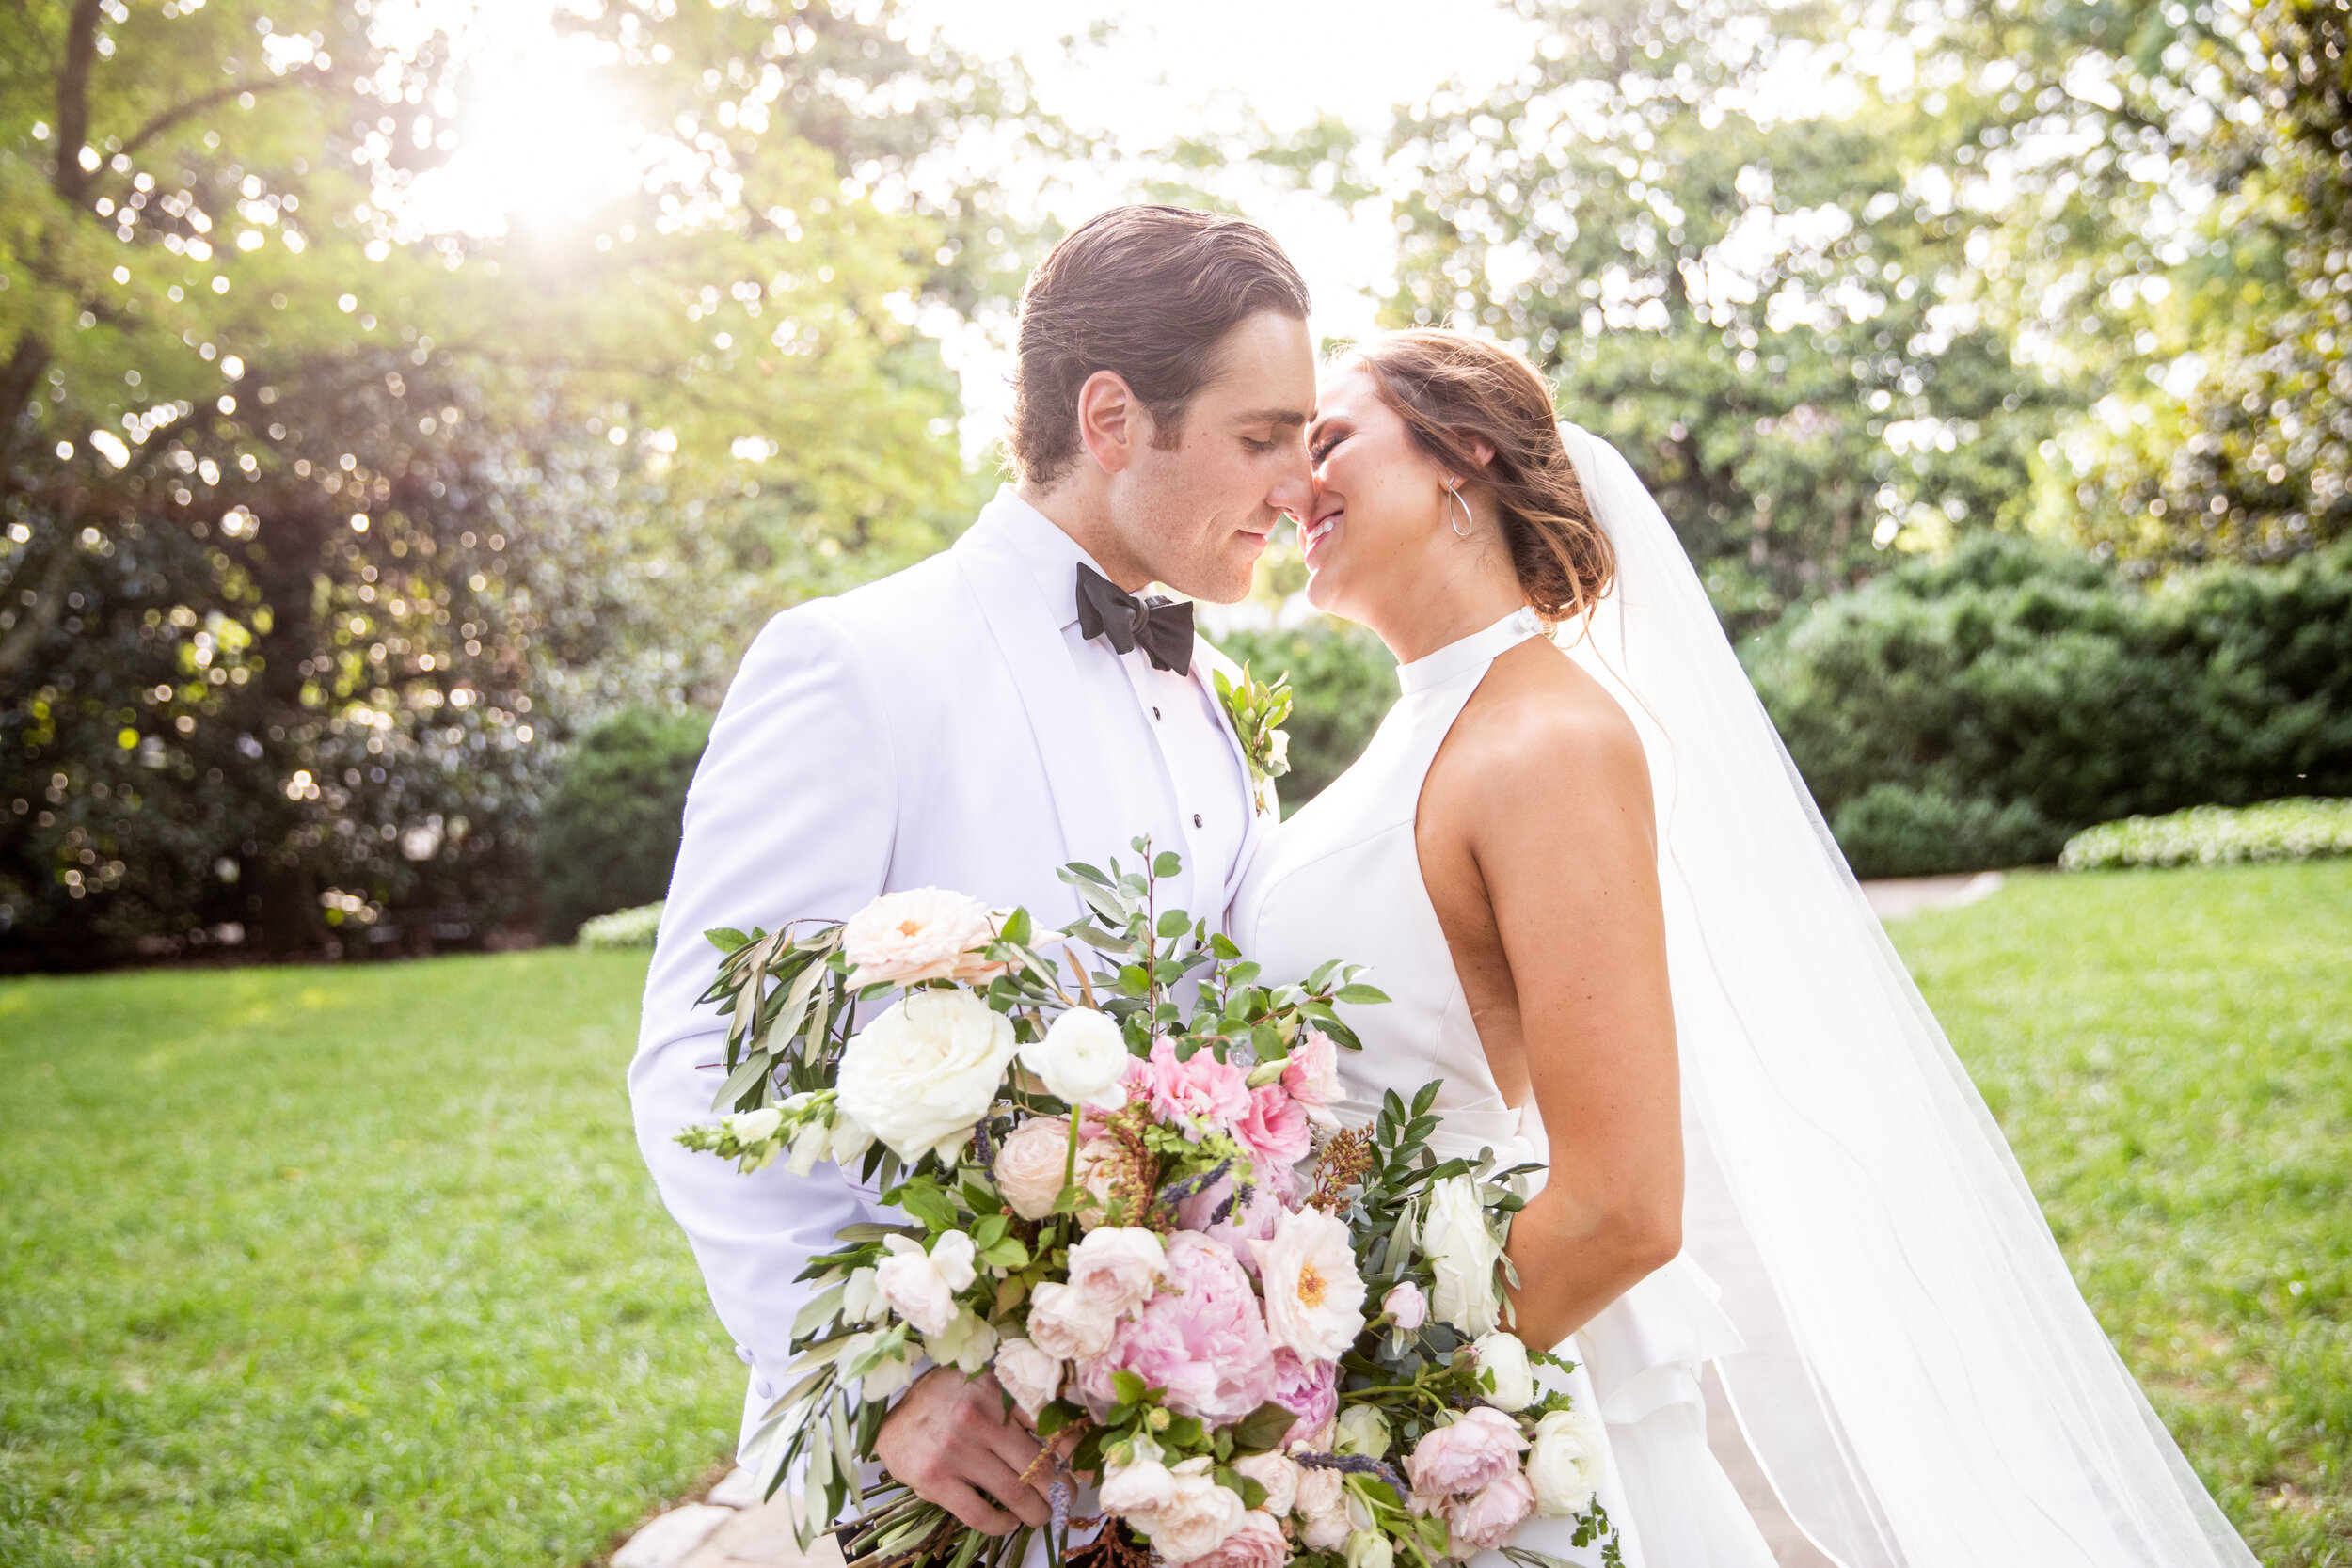 Loose, untamed bridal bouquet with soft pink peonies, white garden roses, ranunculus, olive branches, ferns, and greenery. Nashville wedding and event floral design at Belle Meade Plantation.